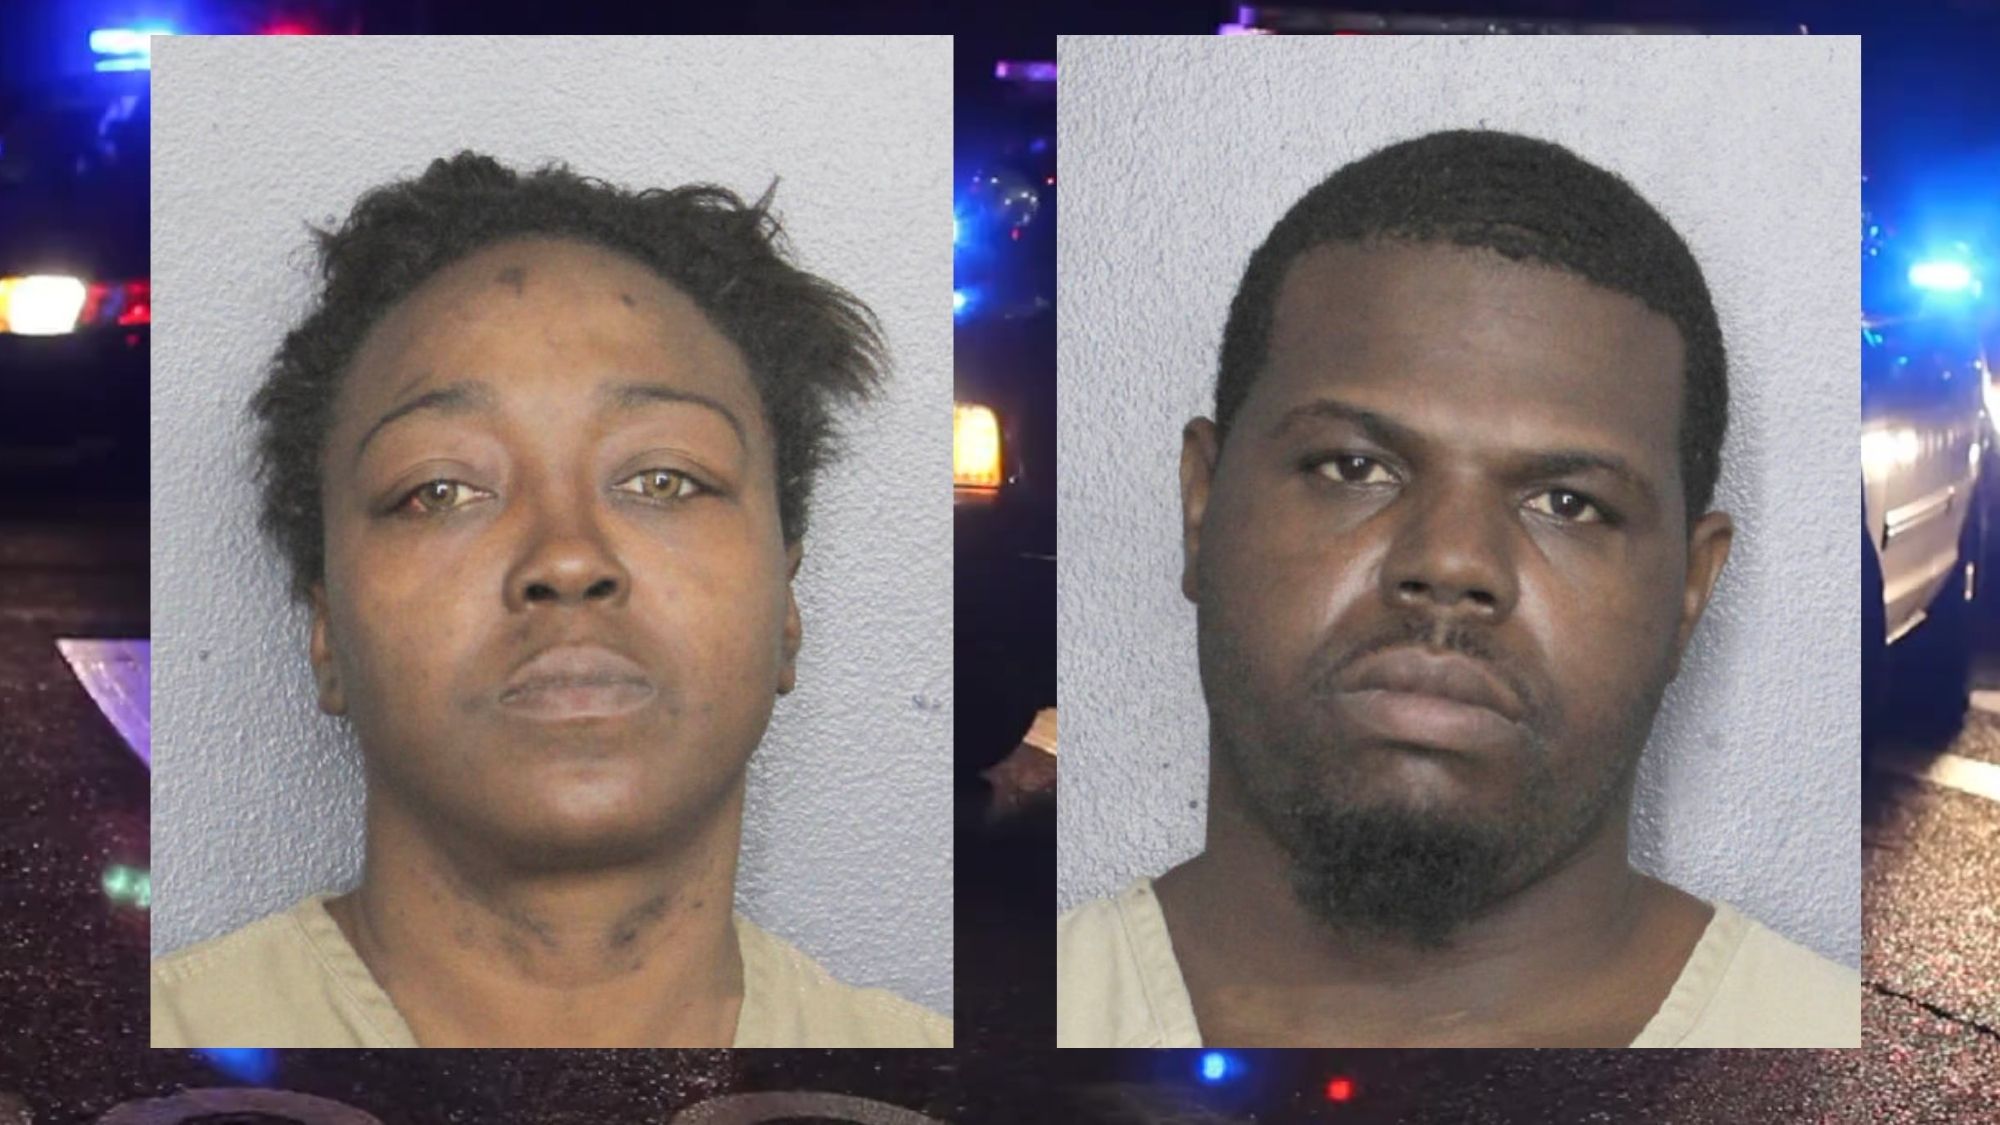 Kidnapping Duo Apprehended After Pistol-Whipping and Abducting Victim